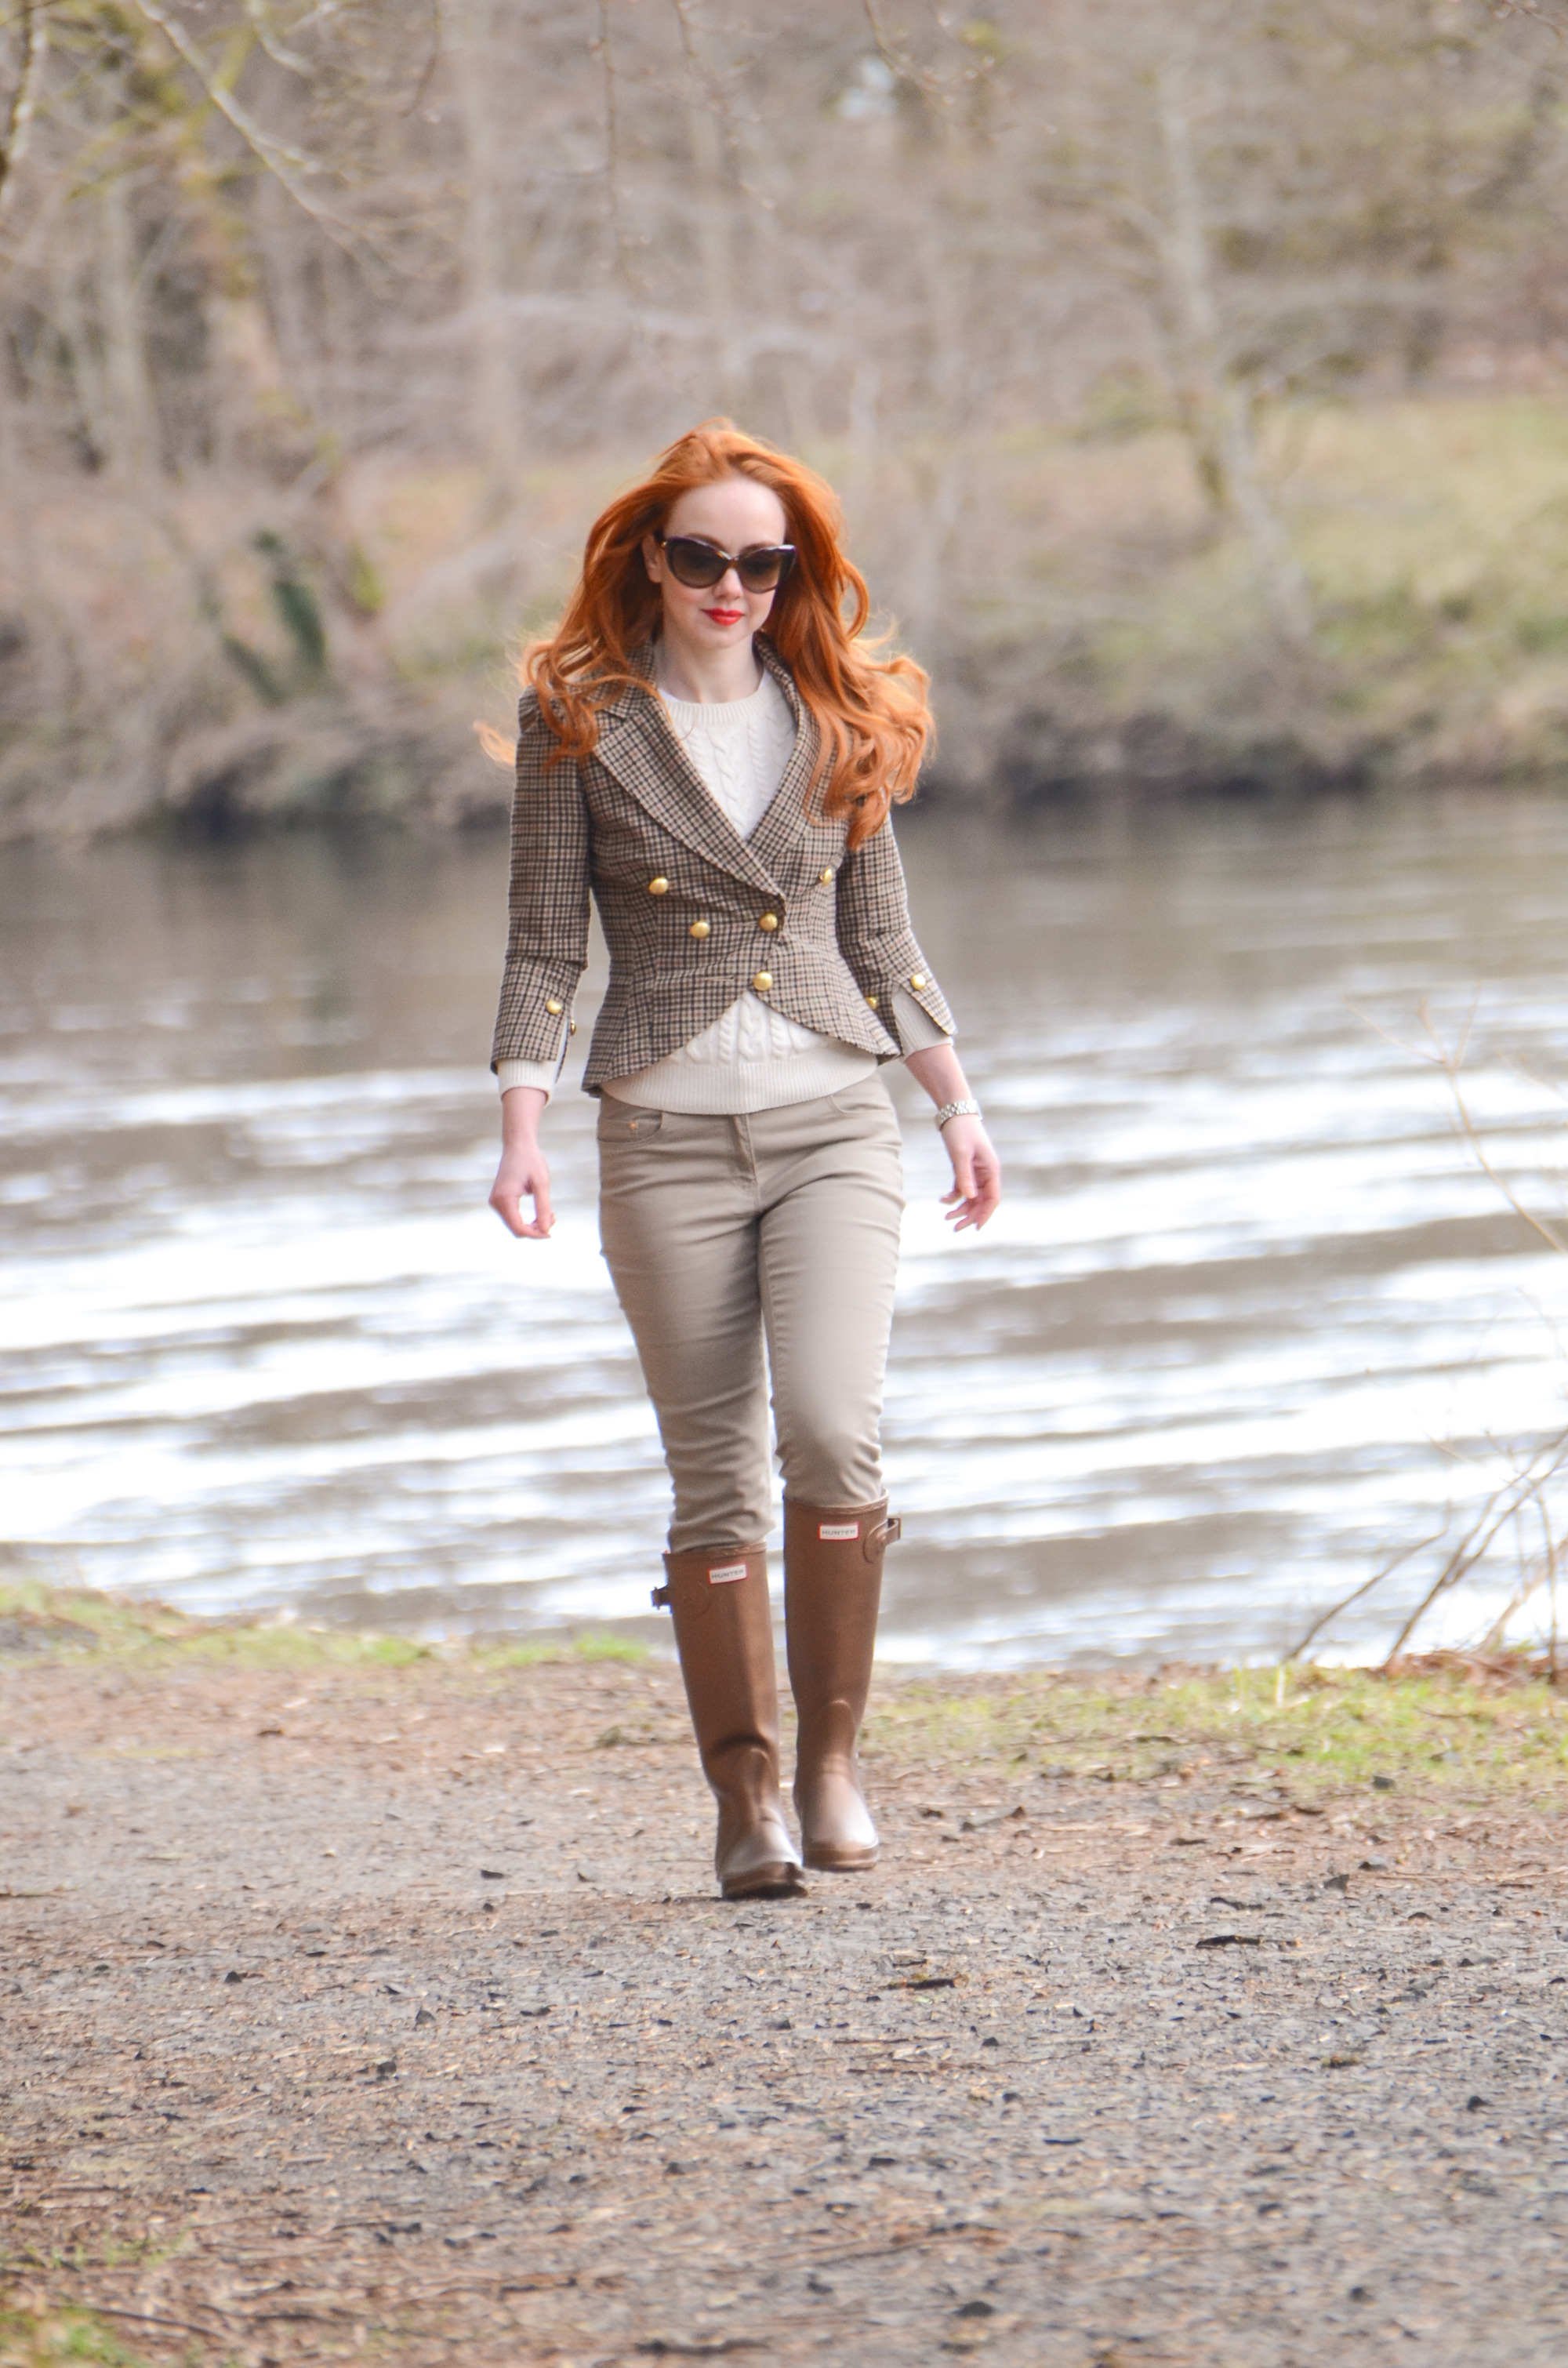 Hunter boots and tweed jacket countryside outfit